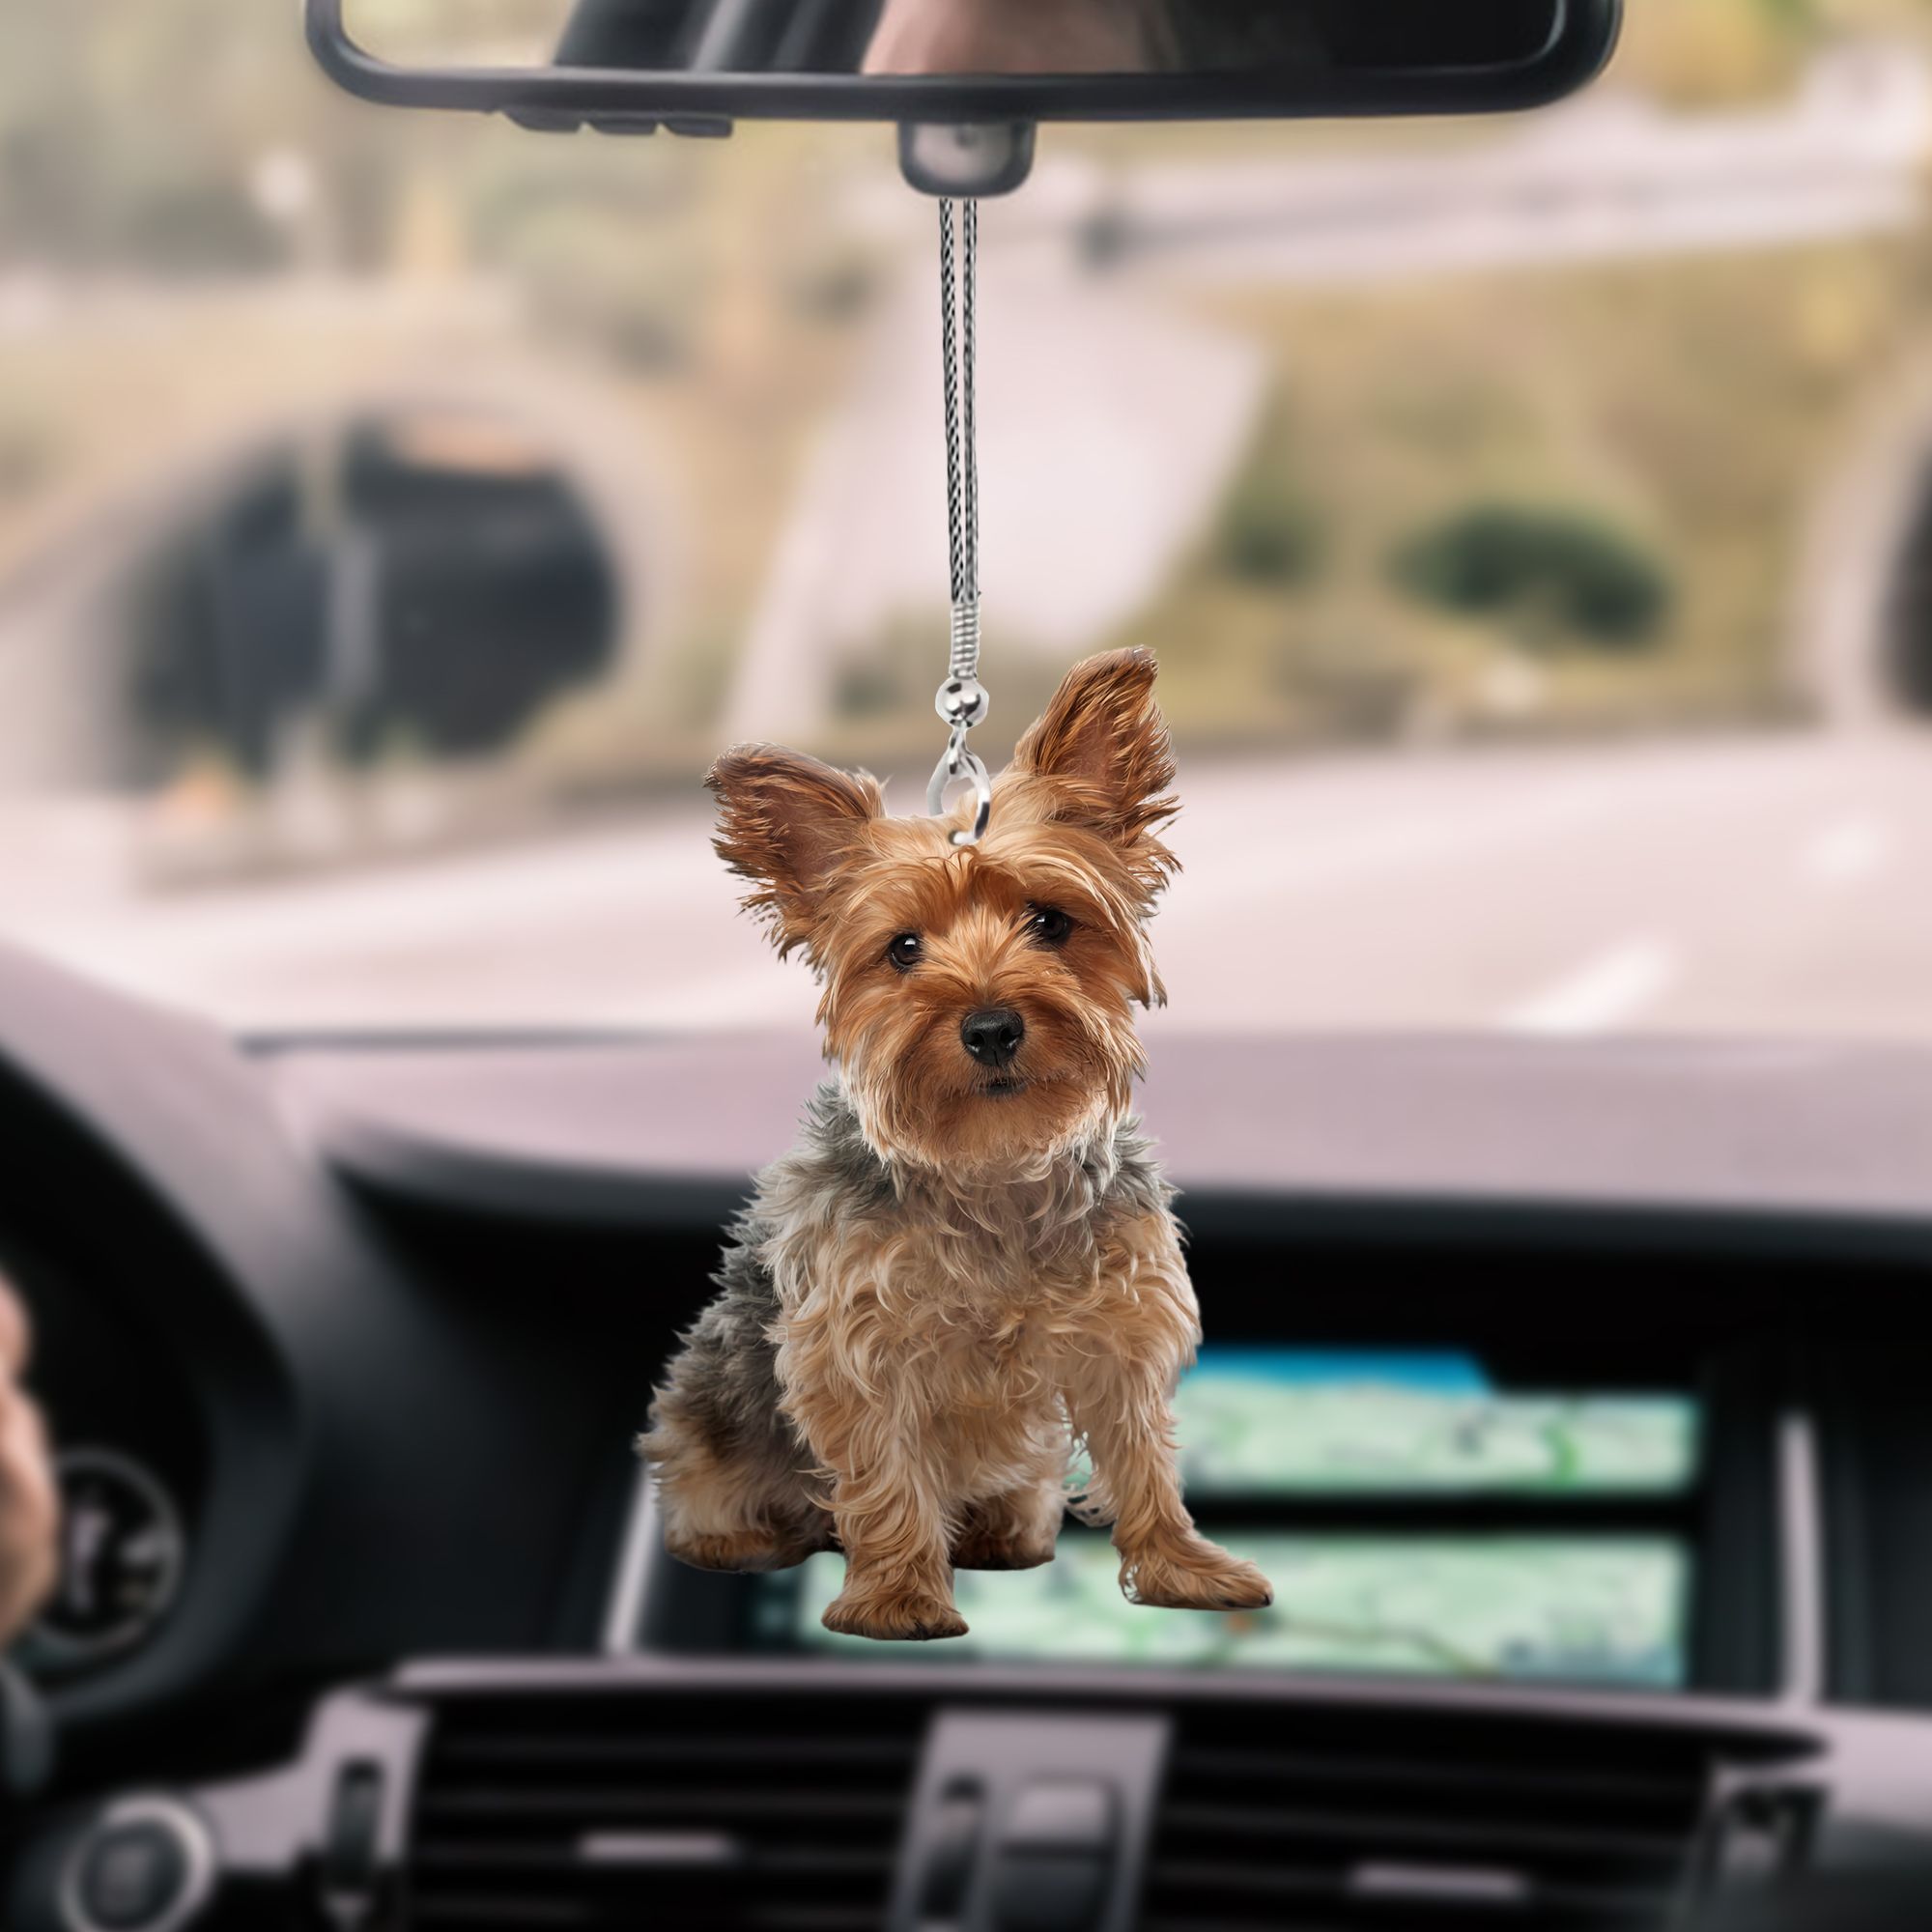 yorkshire-terrier-sitting-py77-ntt070997-nct-car-hanging-ornament